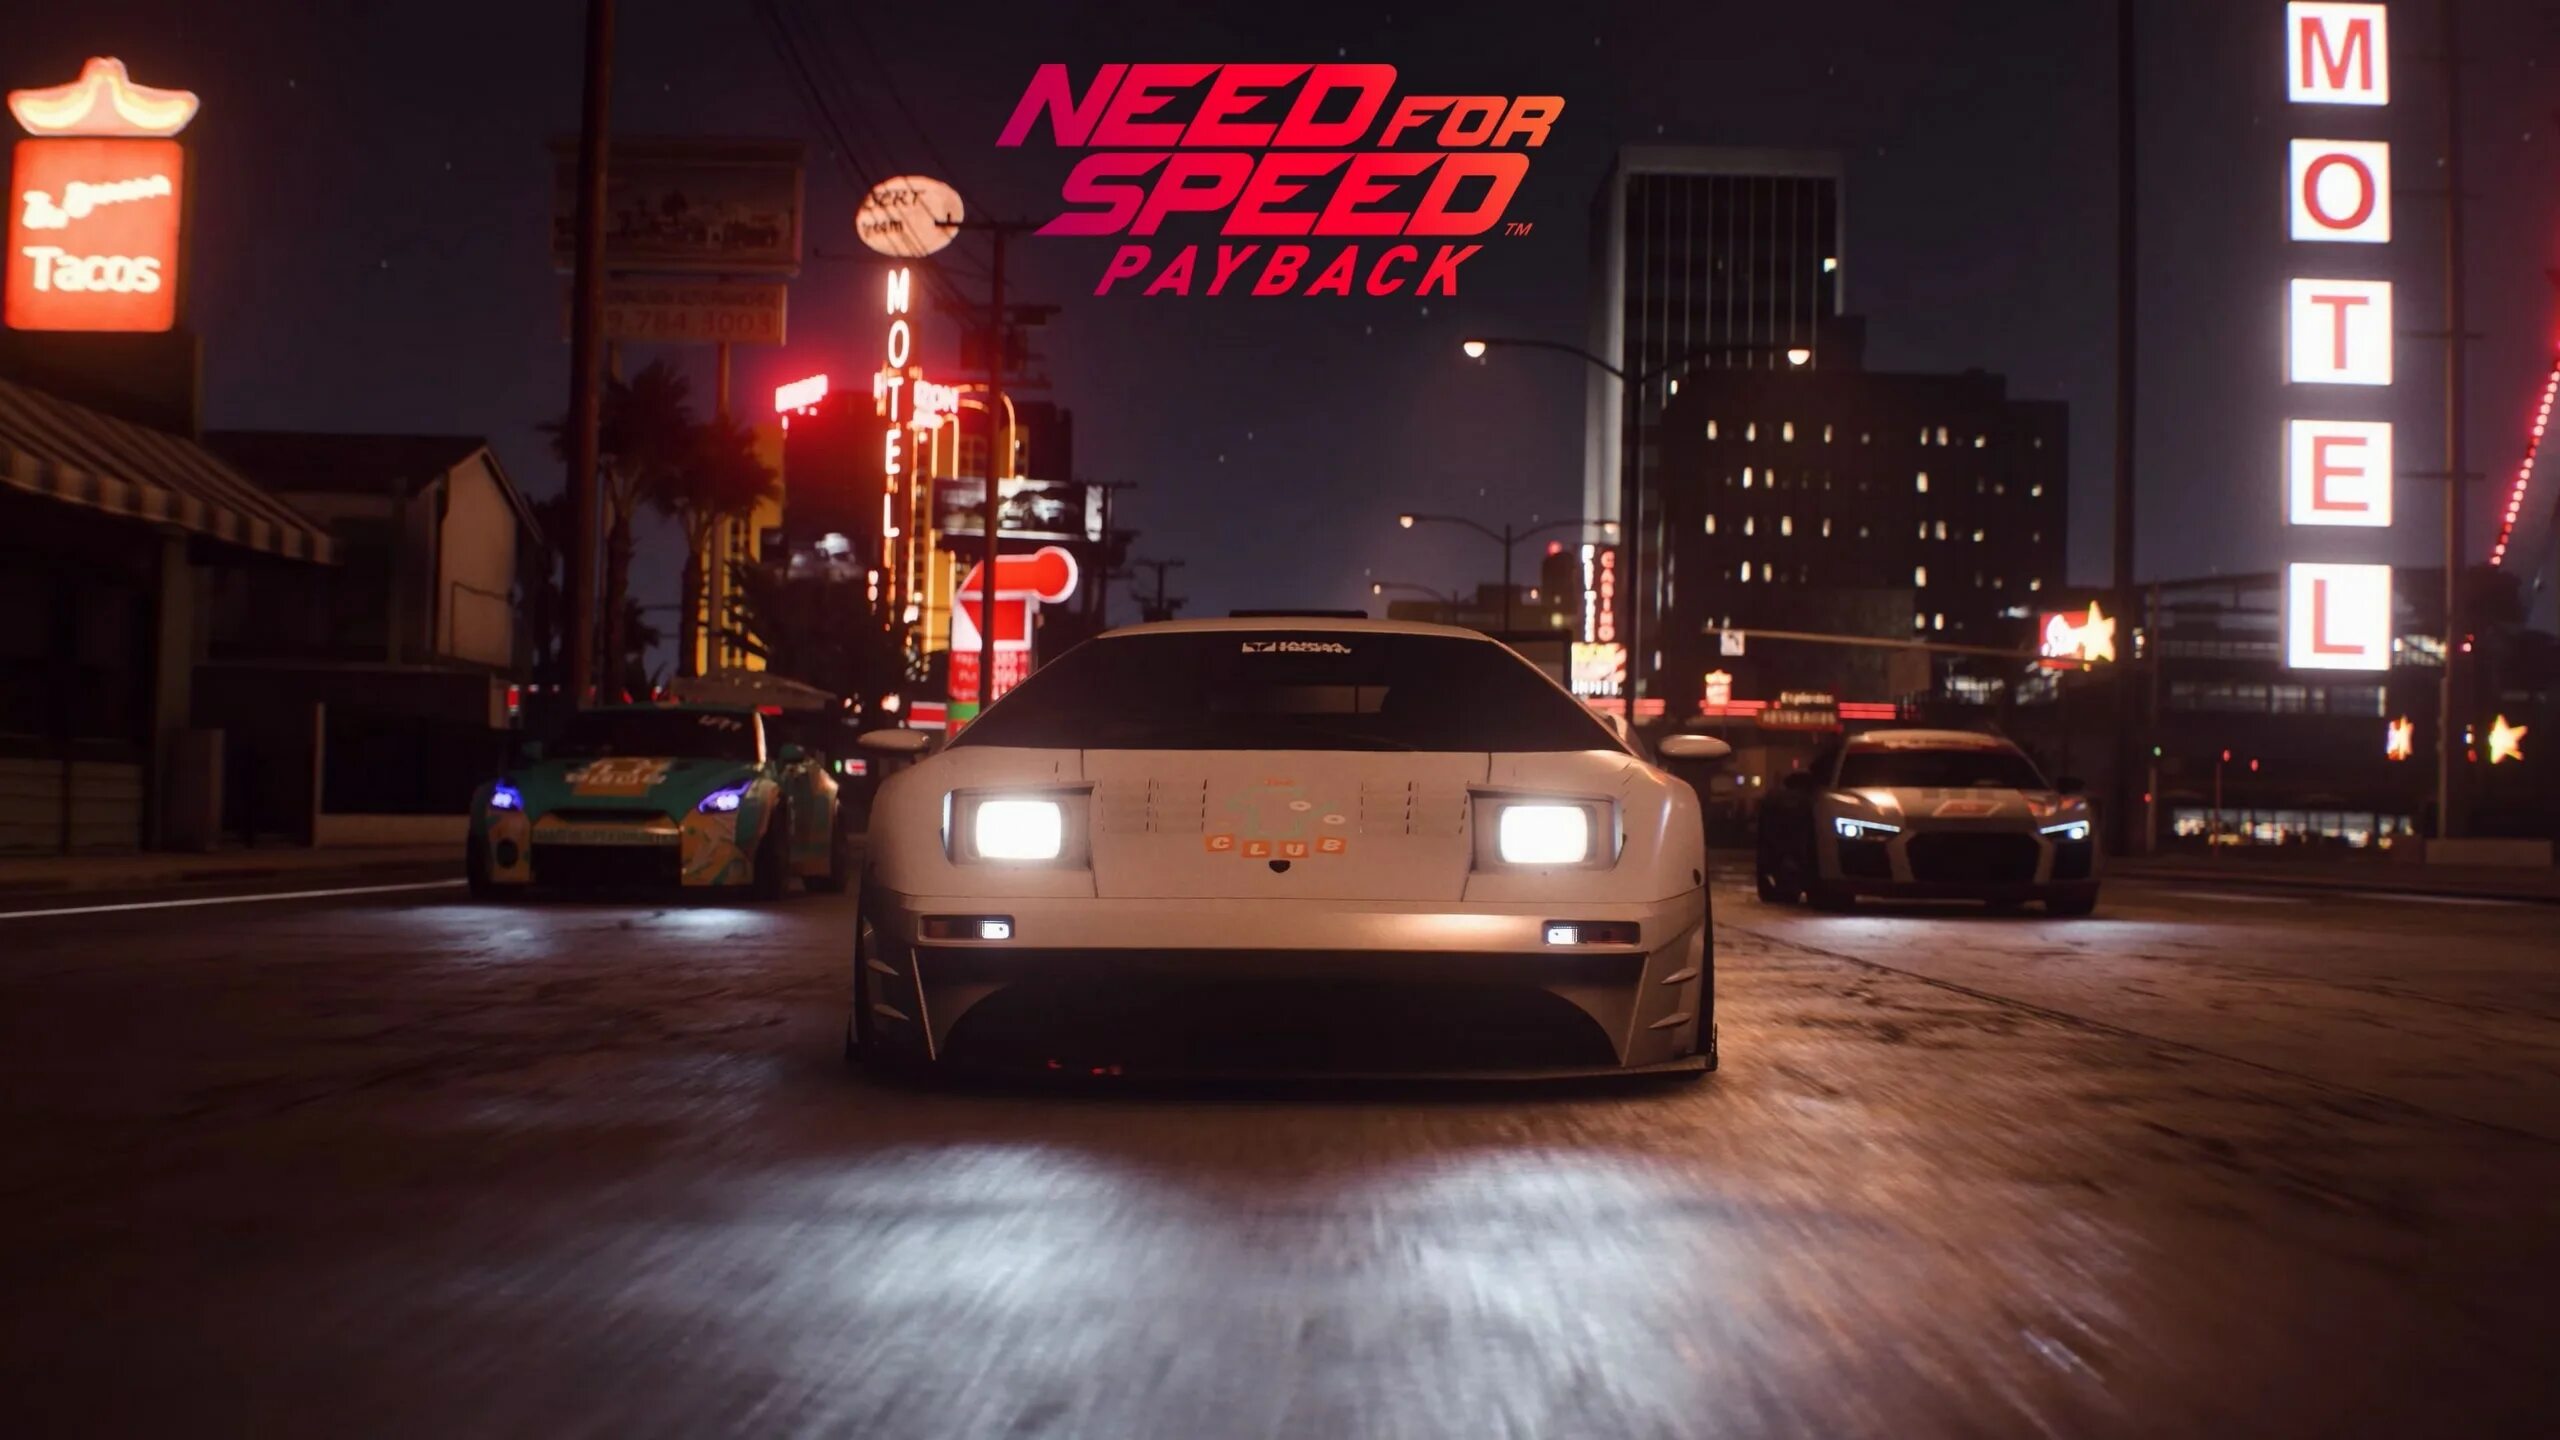 NFS Payback. Игра need for Speed Payback. Need for Speed пайбэк.